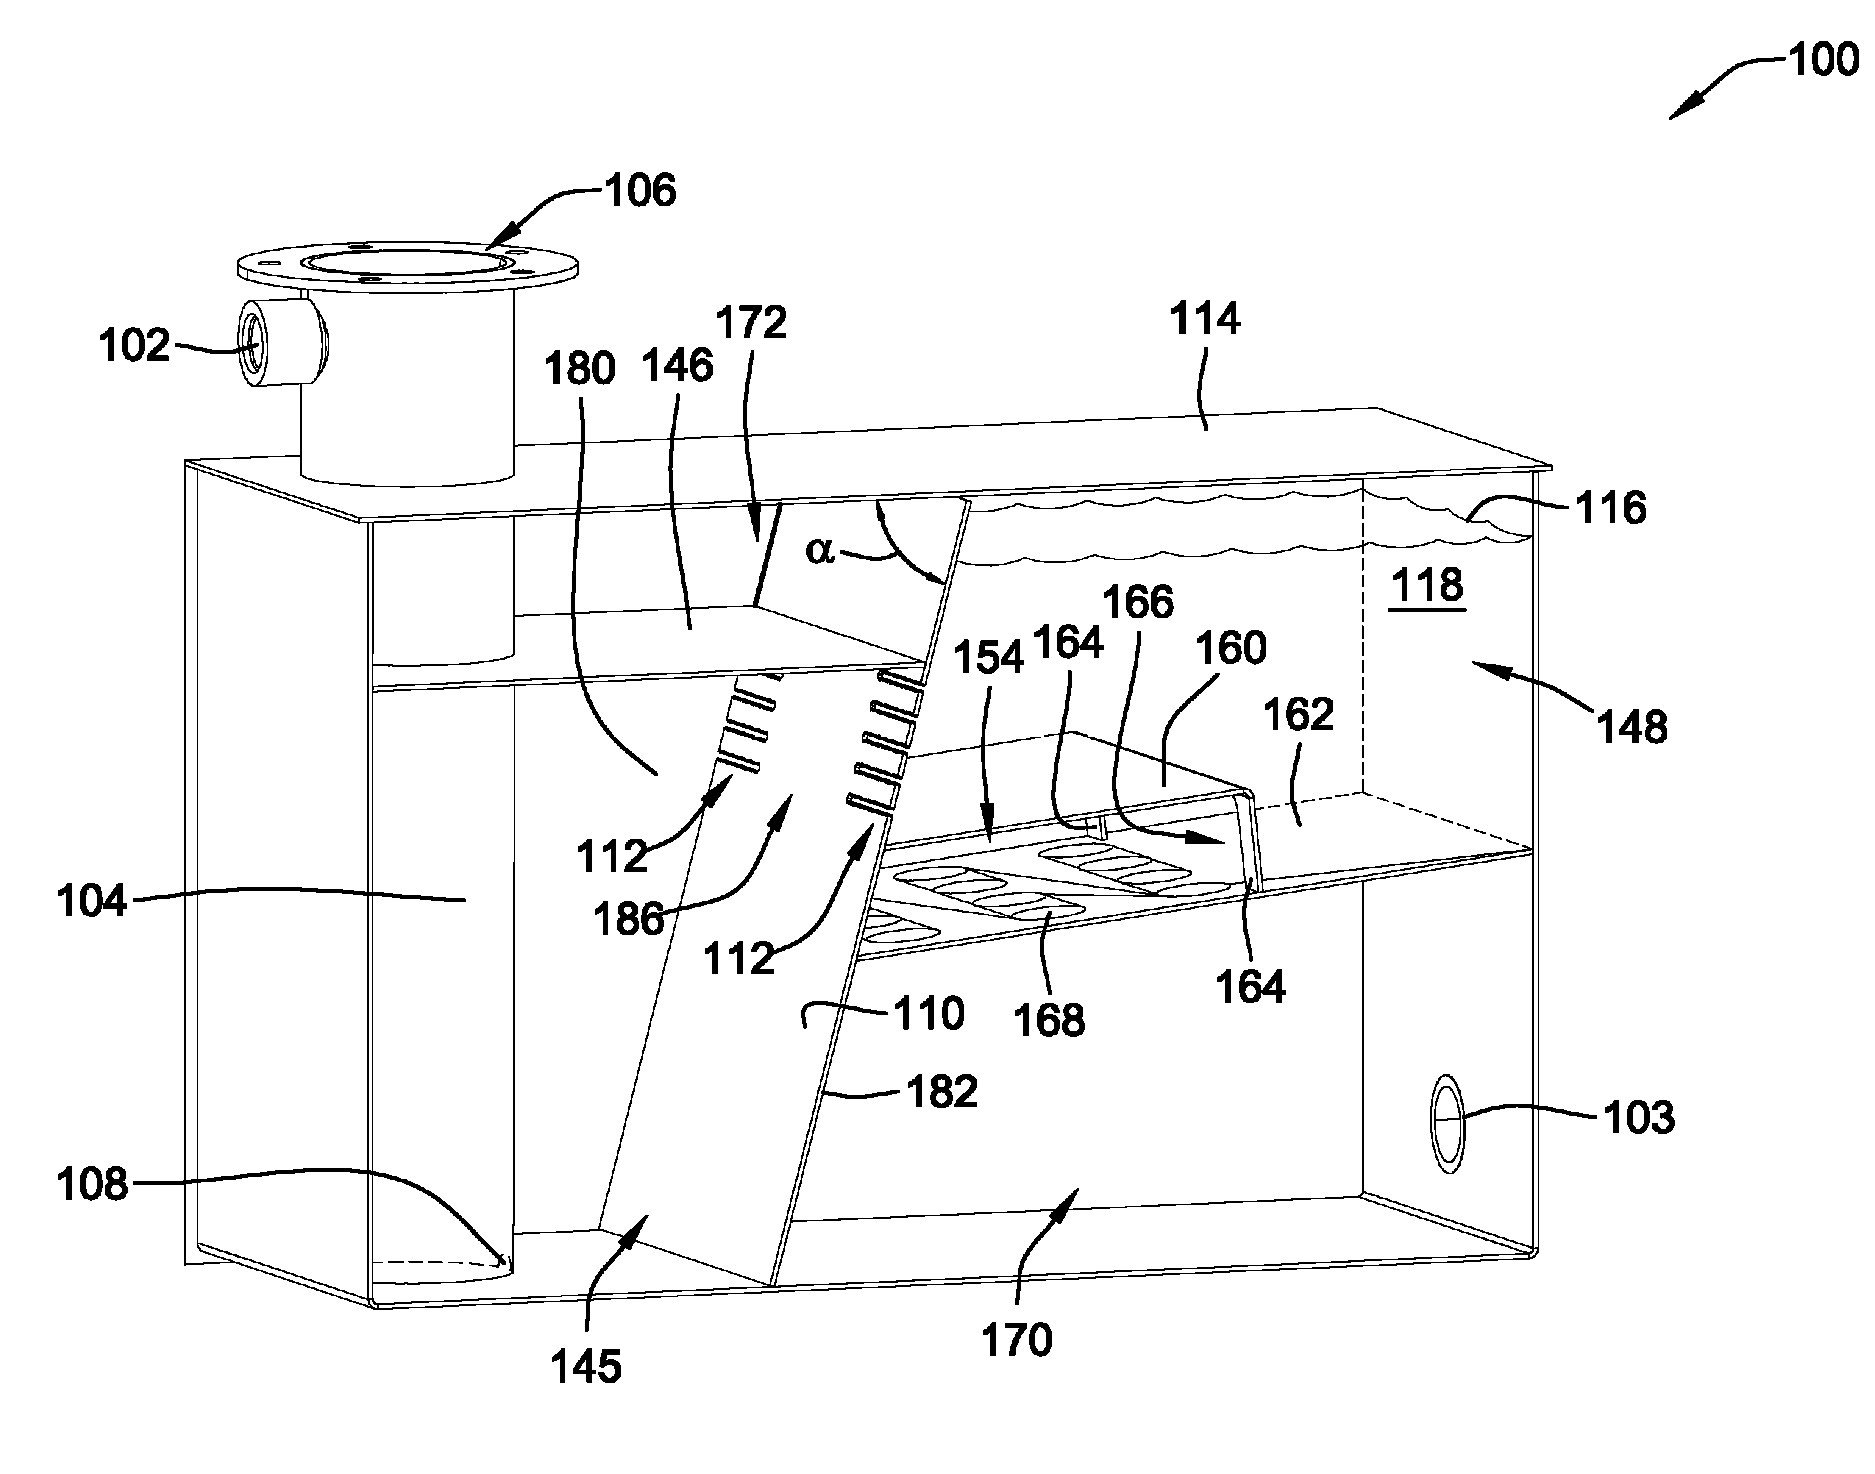 Fluid storage tank configured to remove entrained air from fluid